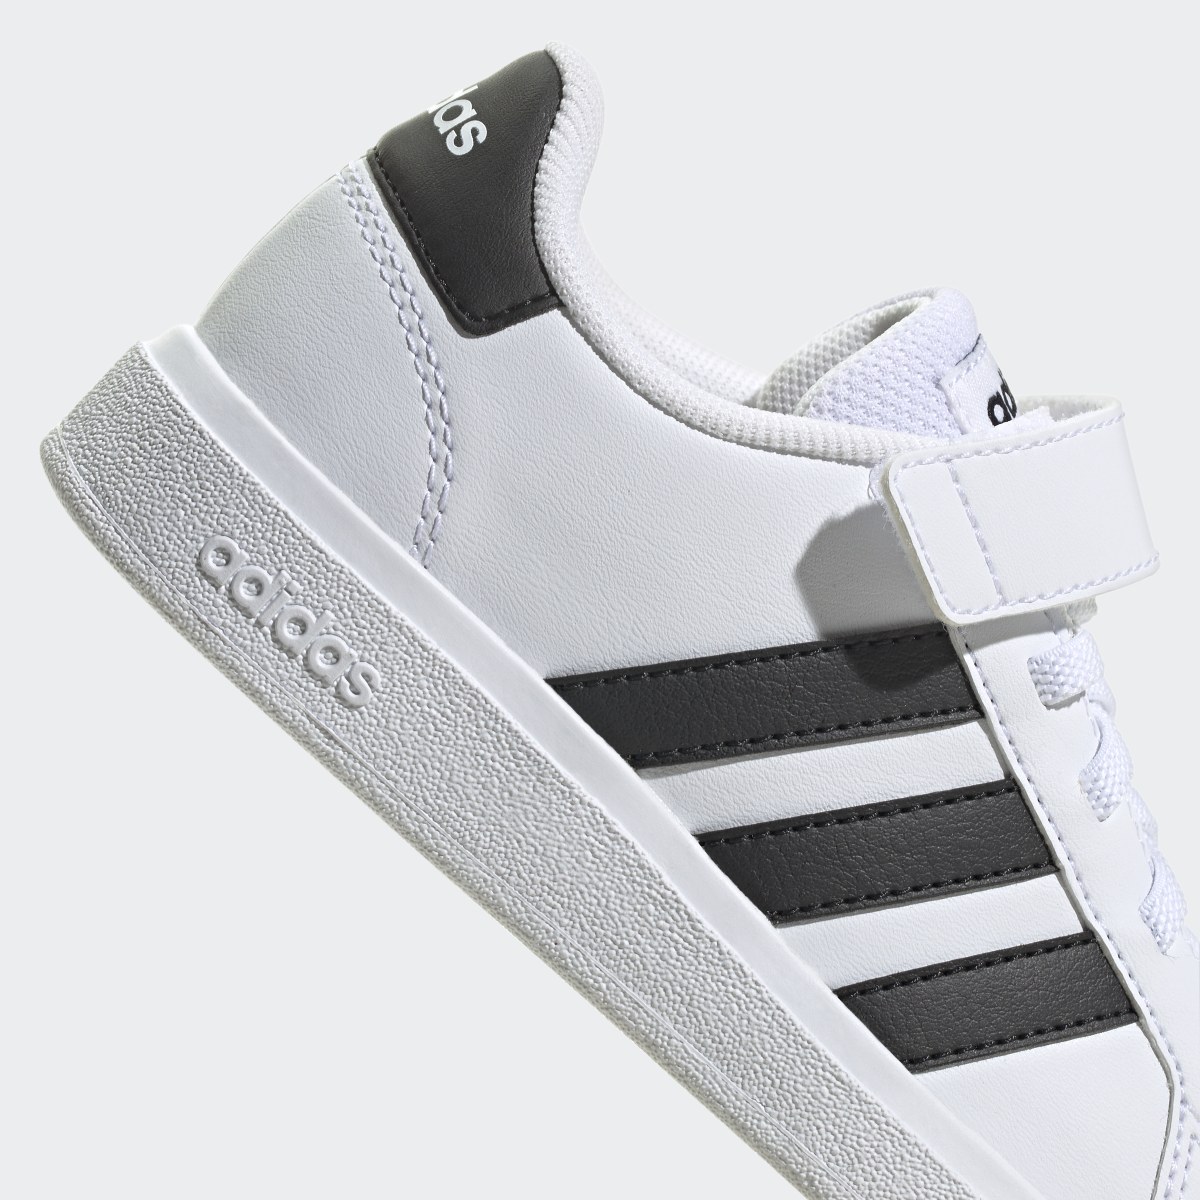 Adidas Grand Court Court Elastic Lace and Top Strap Shoes. 10